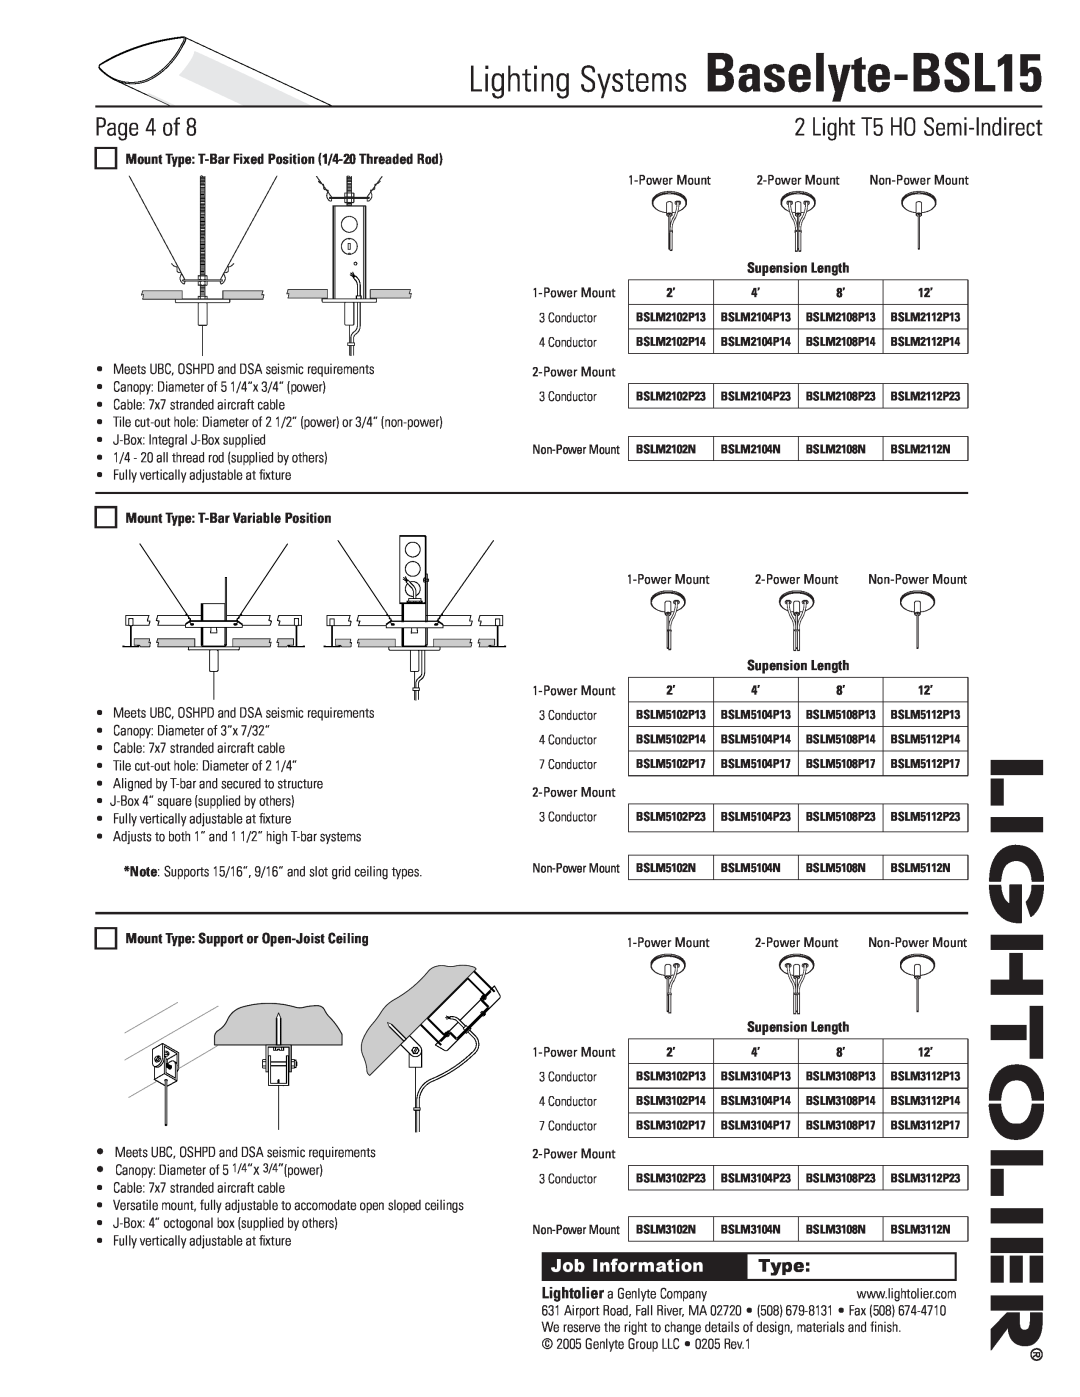 Lightolier Baselyte-BSL15 Page of, Mount Type T-BarVariable Position, Mount Type Support or Open-JoistCeiling 